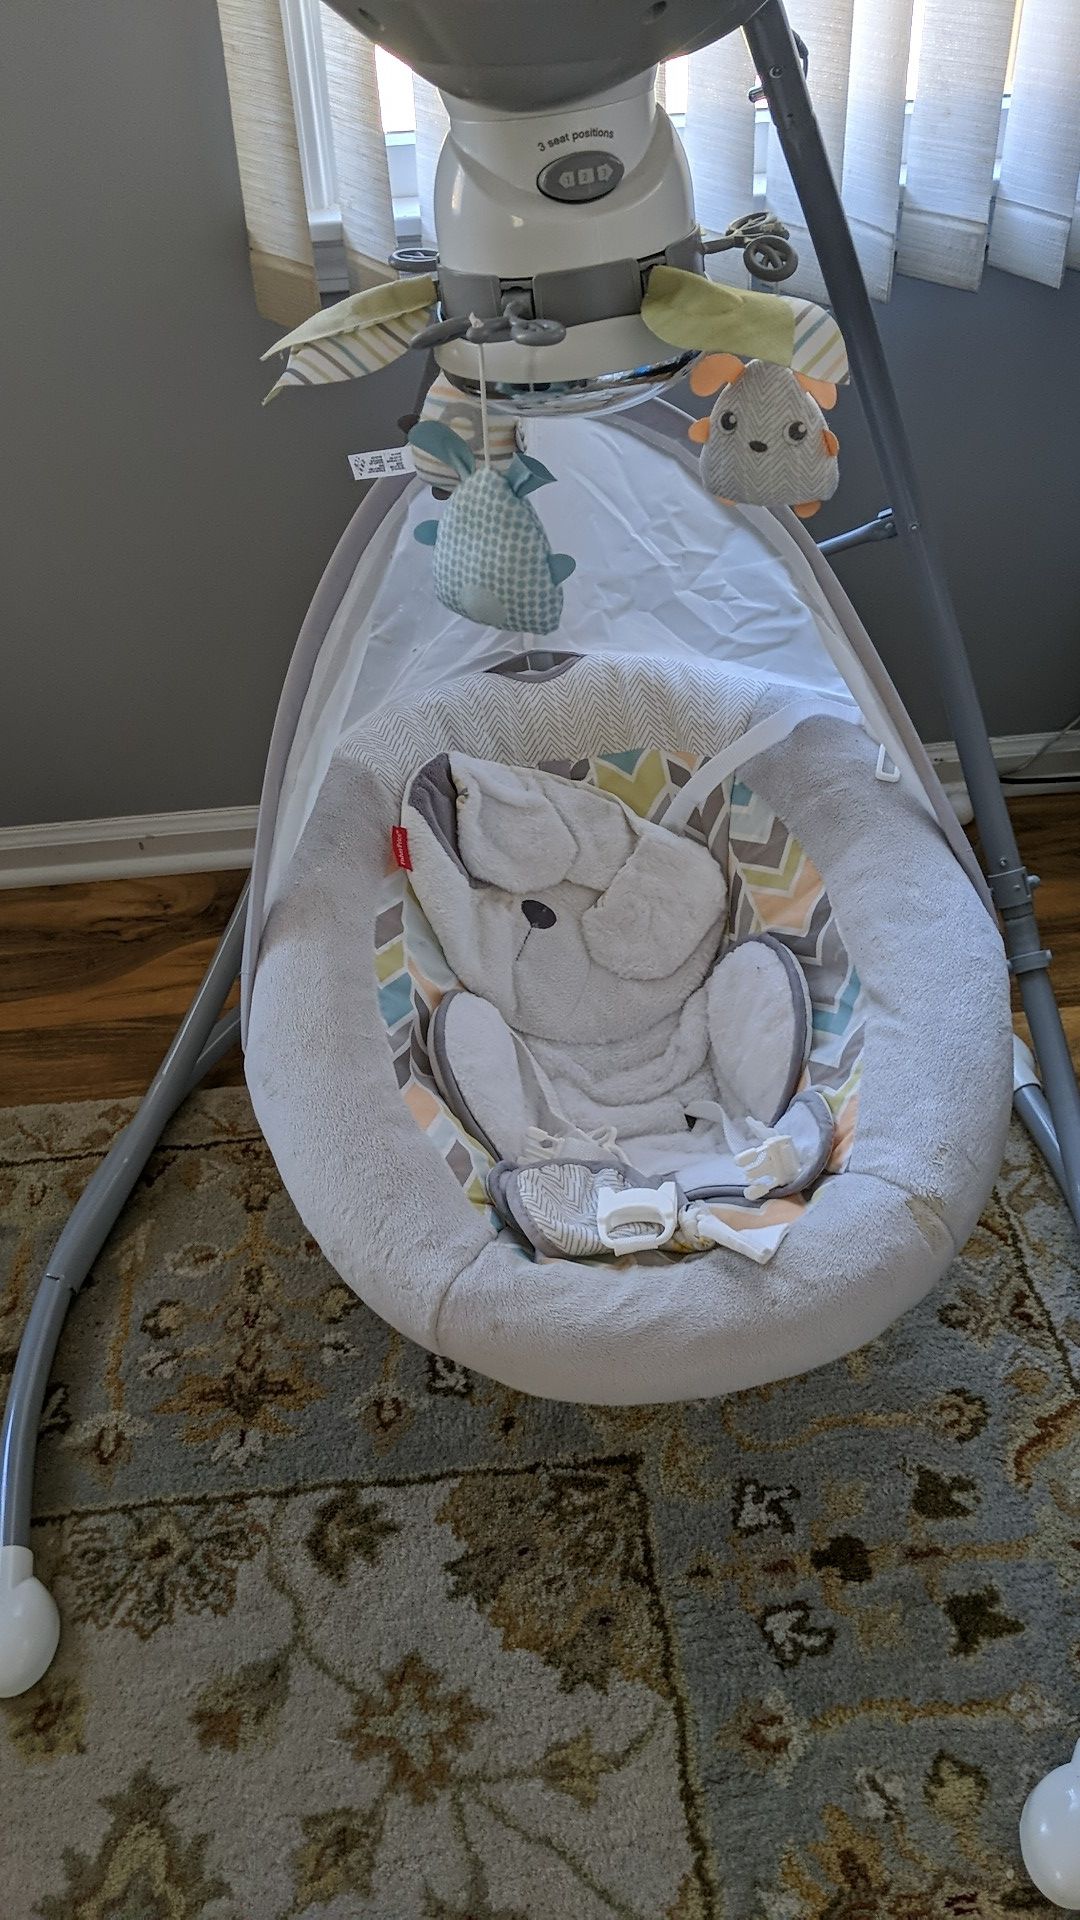 Barely used baby swing, changes to 3 positions. Smoke free house